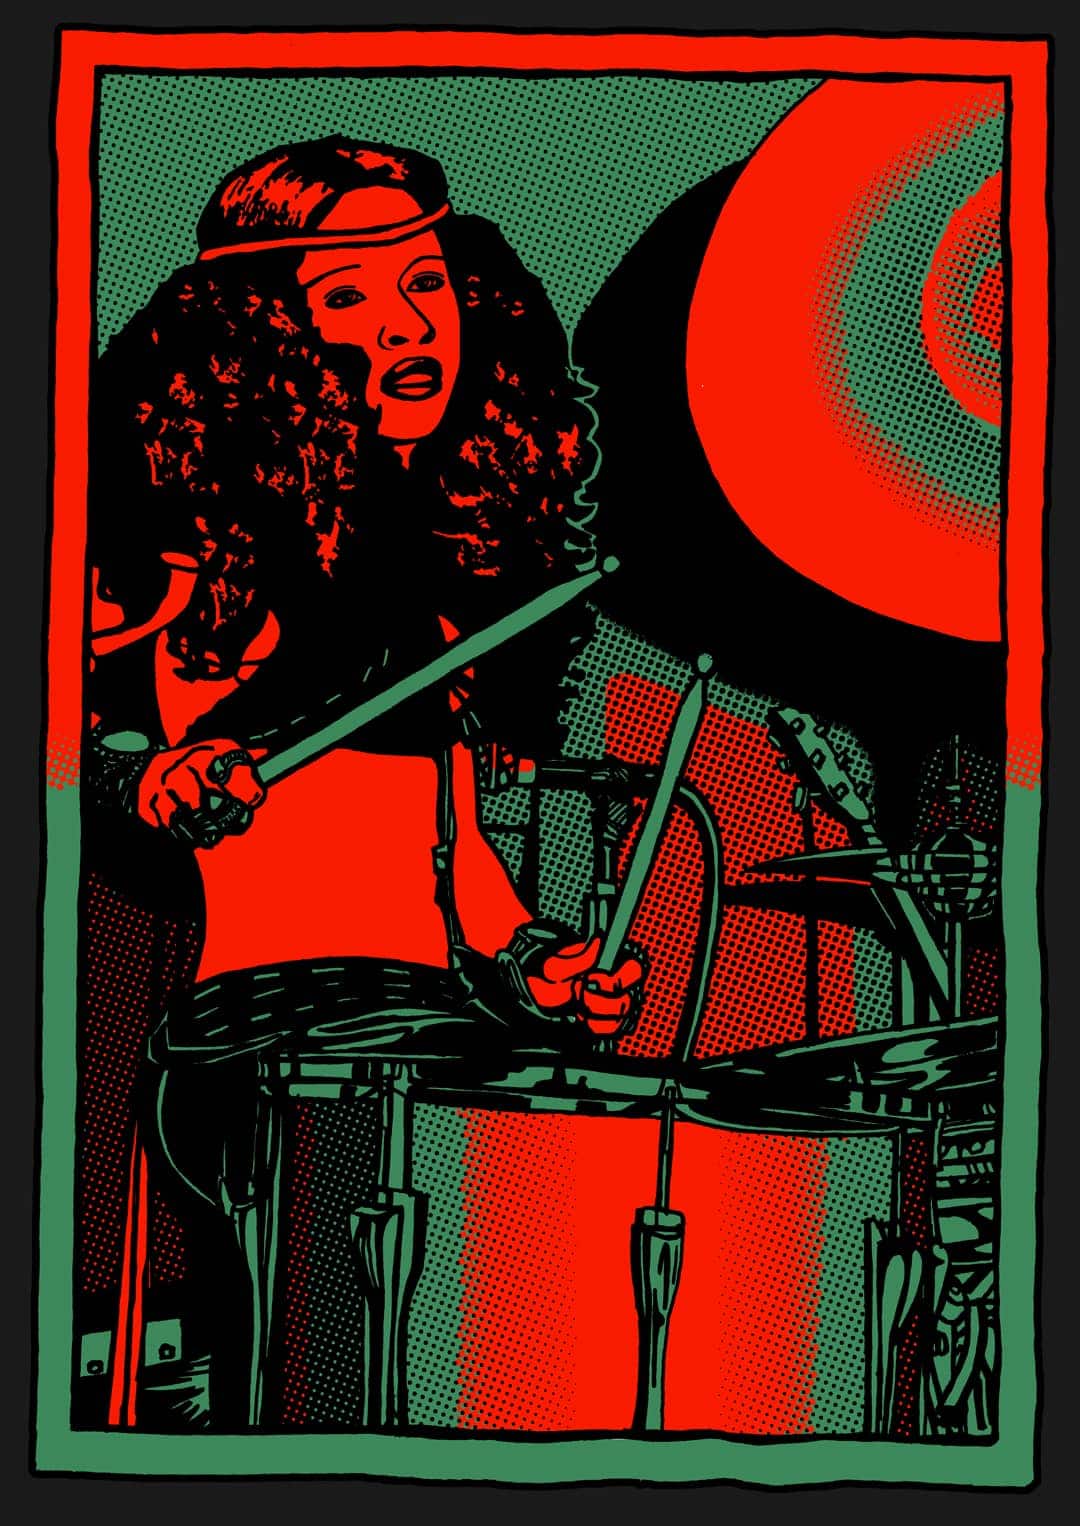 Chaka Khan playing the drums in the band Rufus art drawing by chris morgan creative